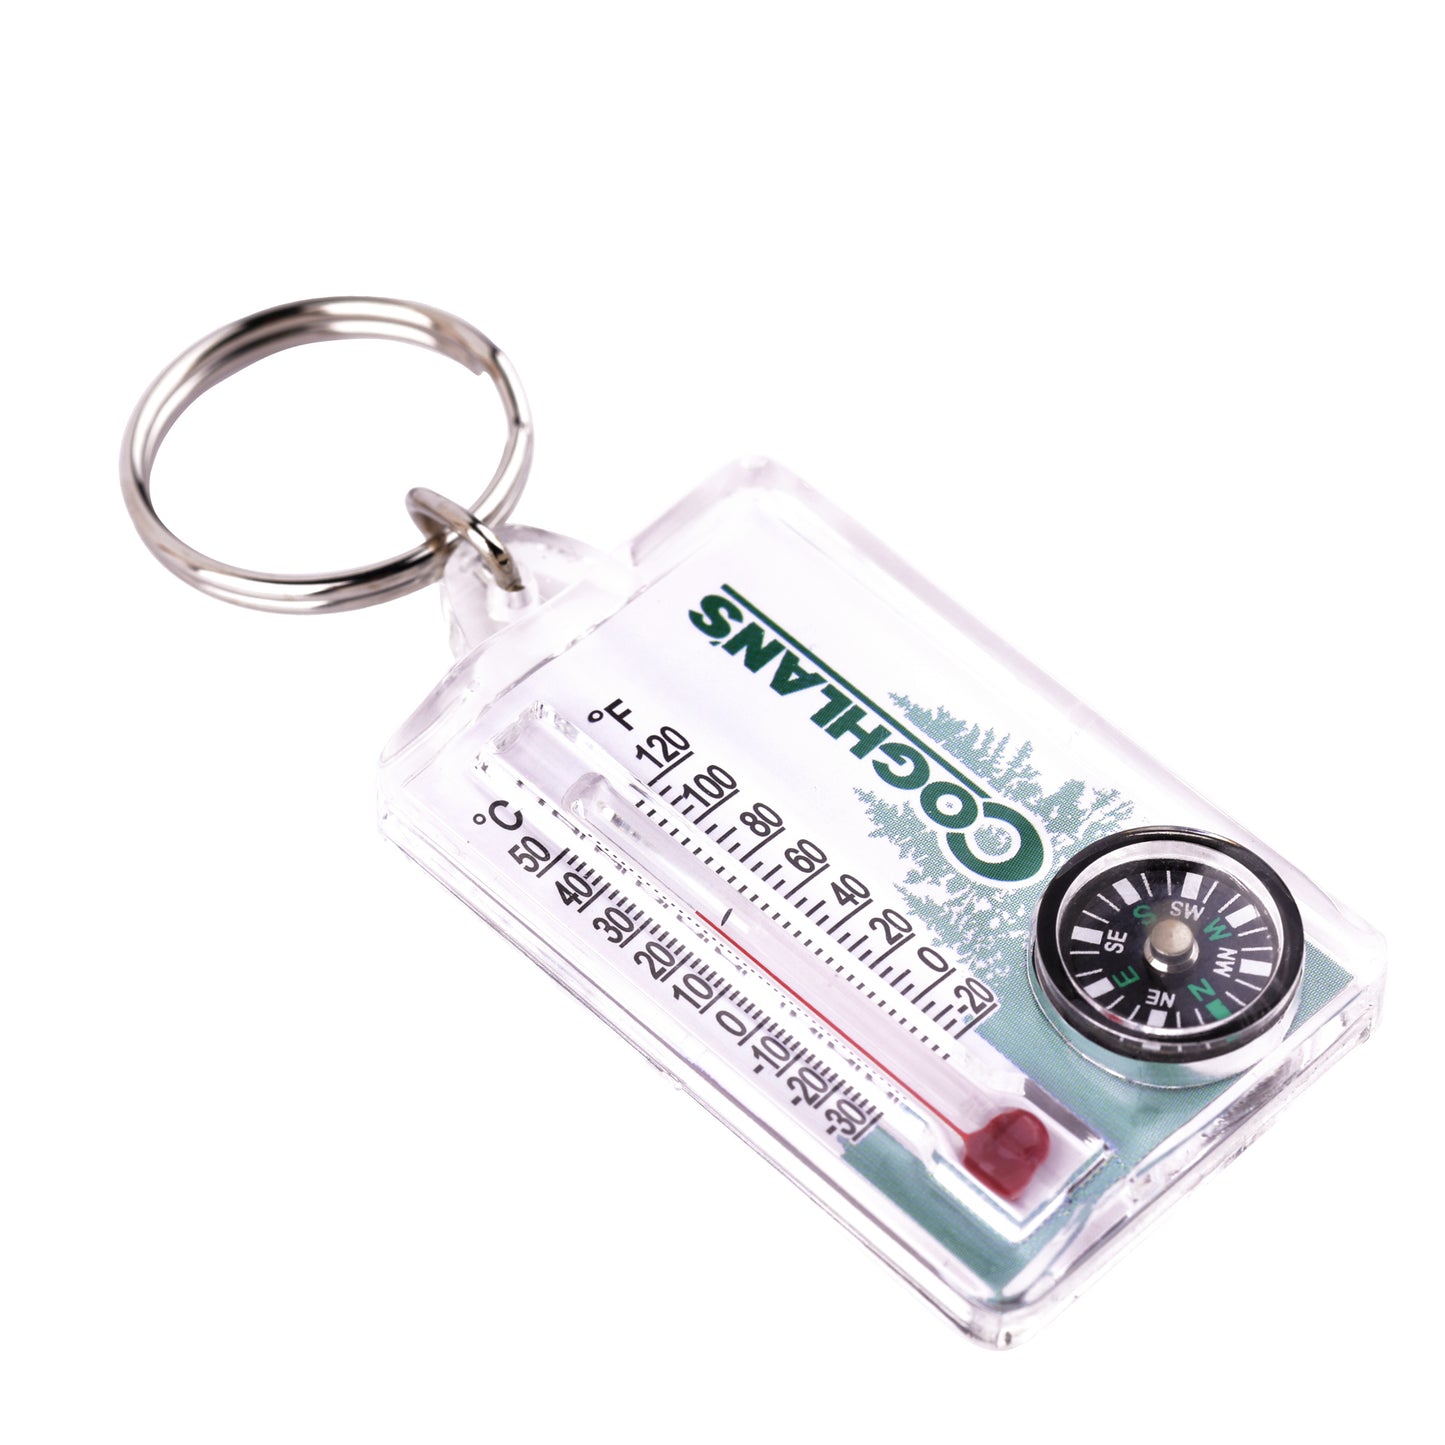 Thermometer and Compass Key Ring